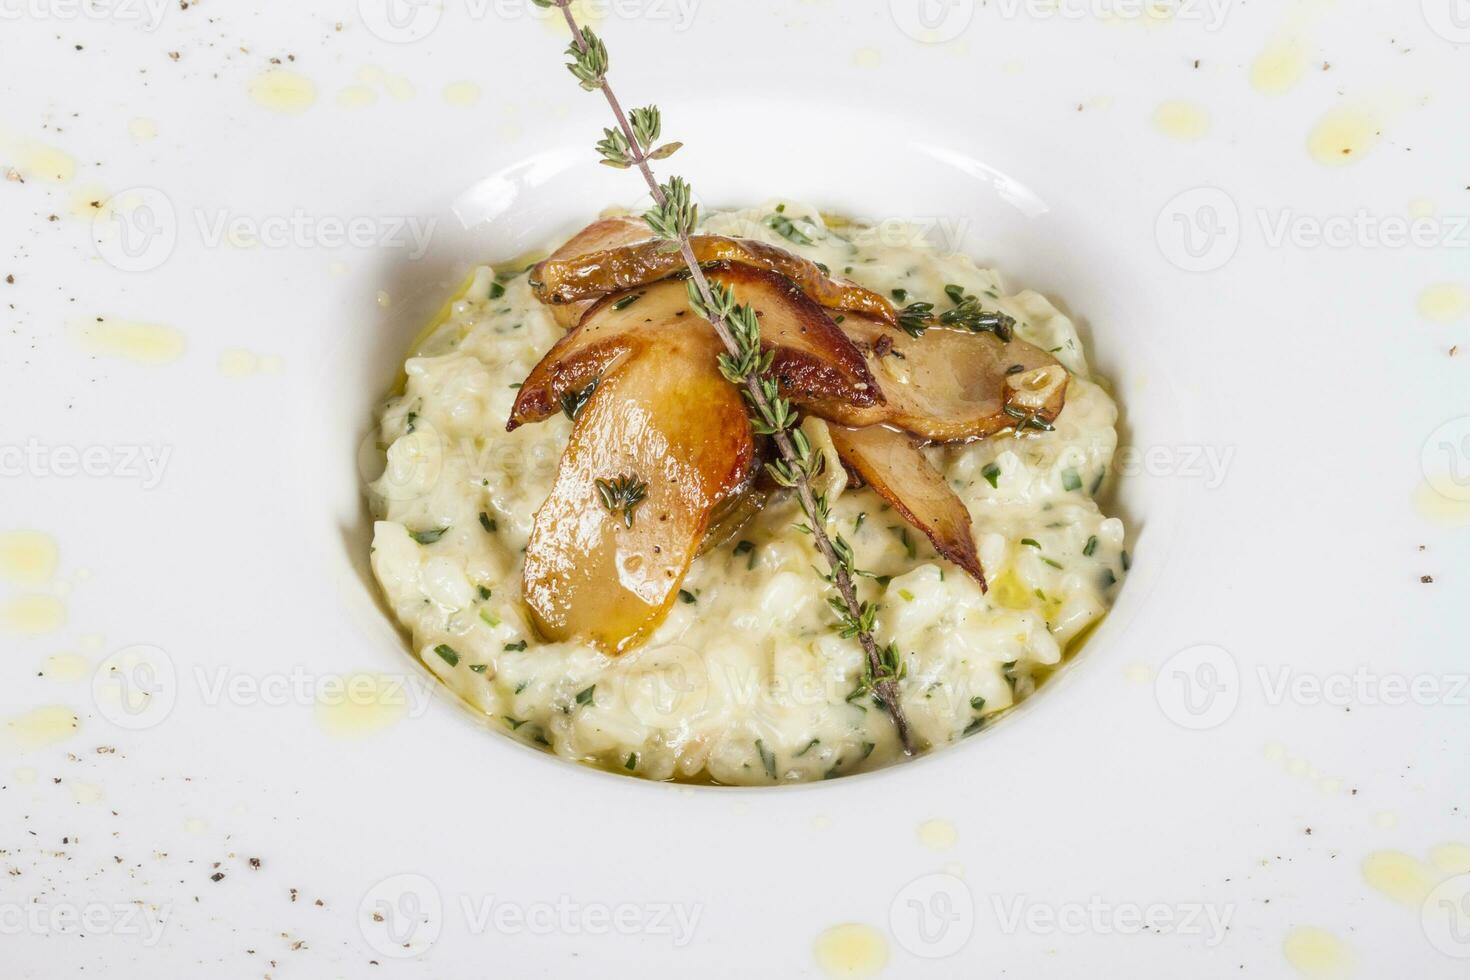 photo of delicious risotto dish with herbs and mushrooms on white background